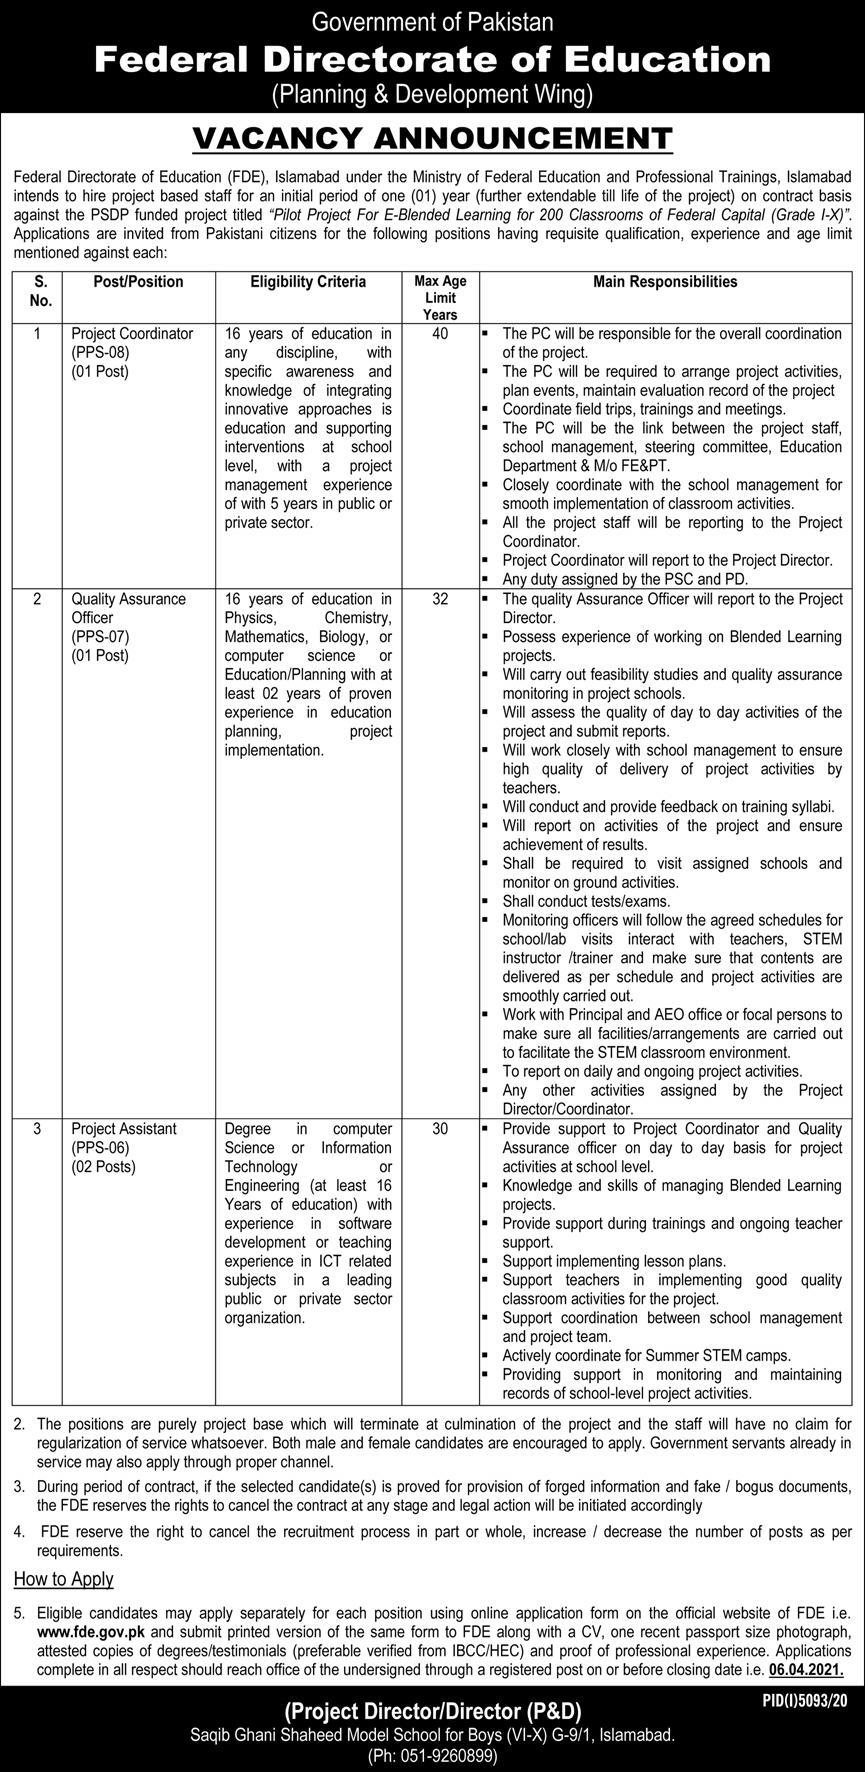 Latest Govt Jobs 2021 in Federal Directorate of Education (FDE)